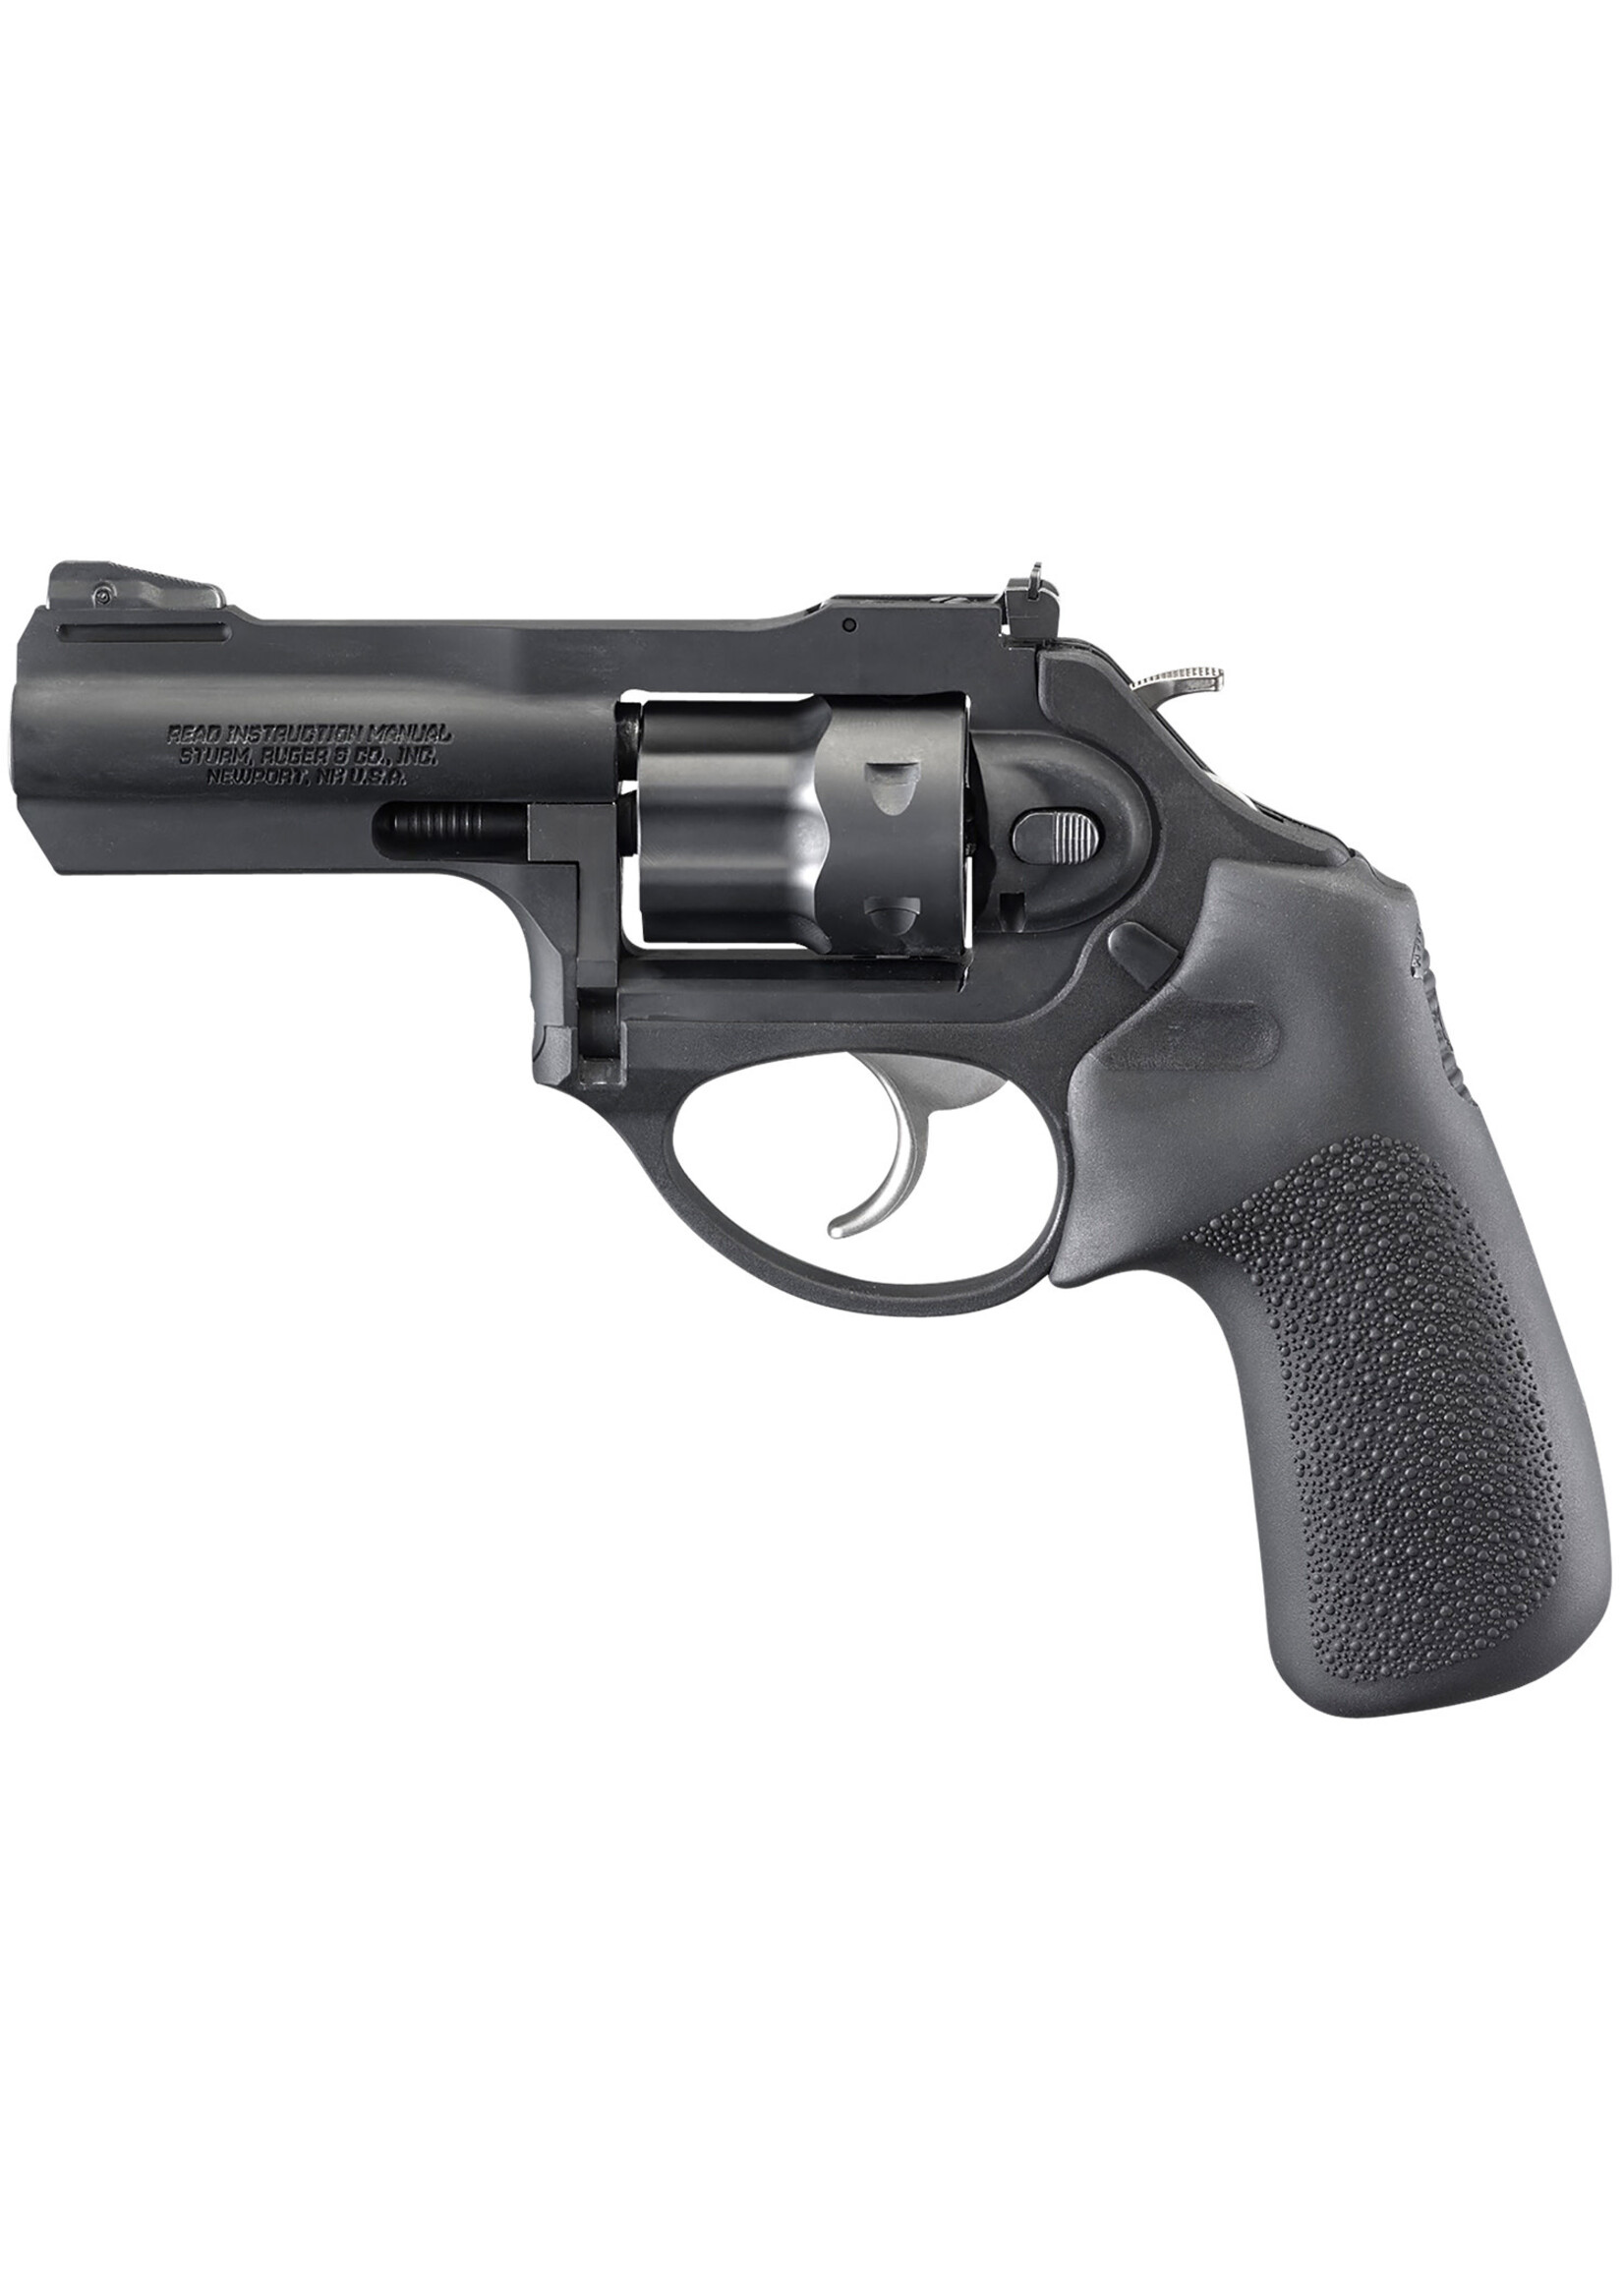 Ruger Ruger, LCRx, Double Action, Revolver, Small Frame, 22 WMR, 3" Barrel, Stainless Steel, Matte Finish, Black, Hogue Tamer Monogrip, Adjustable Black Blade Rear & Replaceable Pinned Ramp Front Sight, 6 Rounds